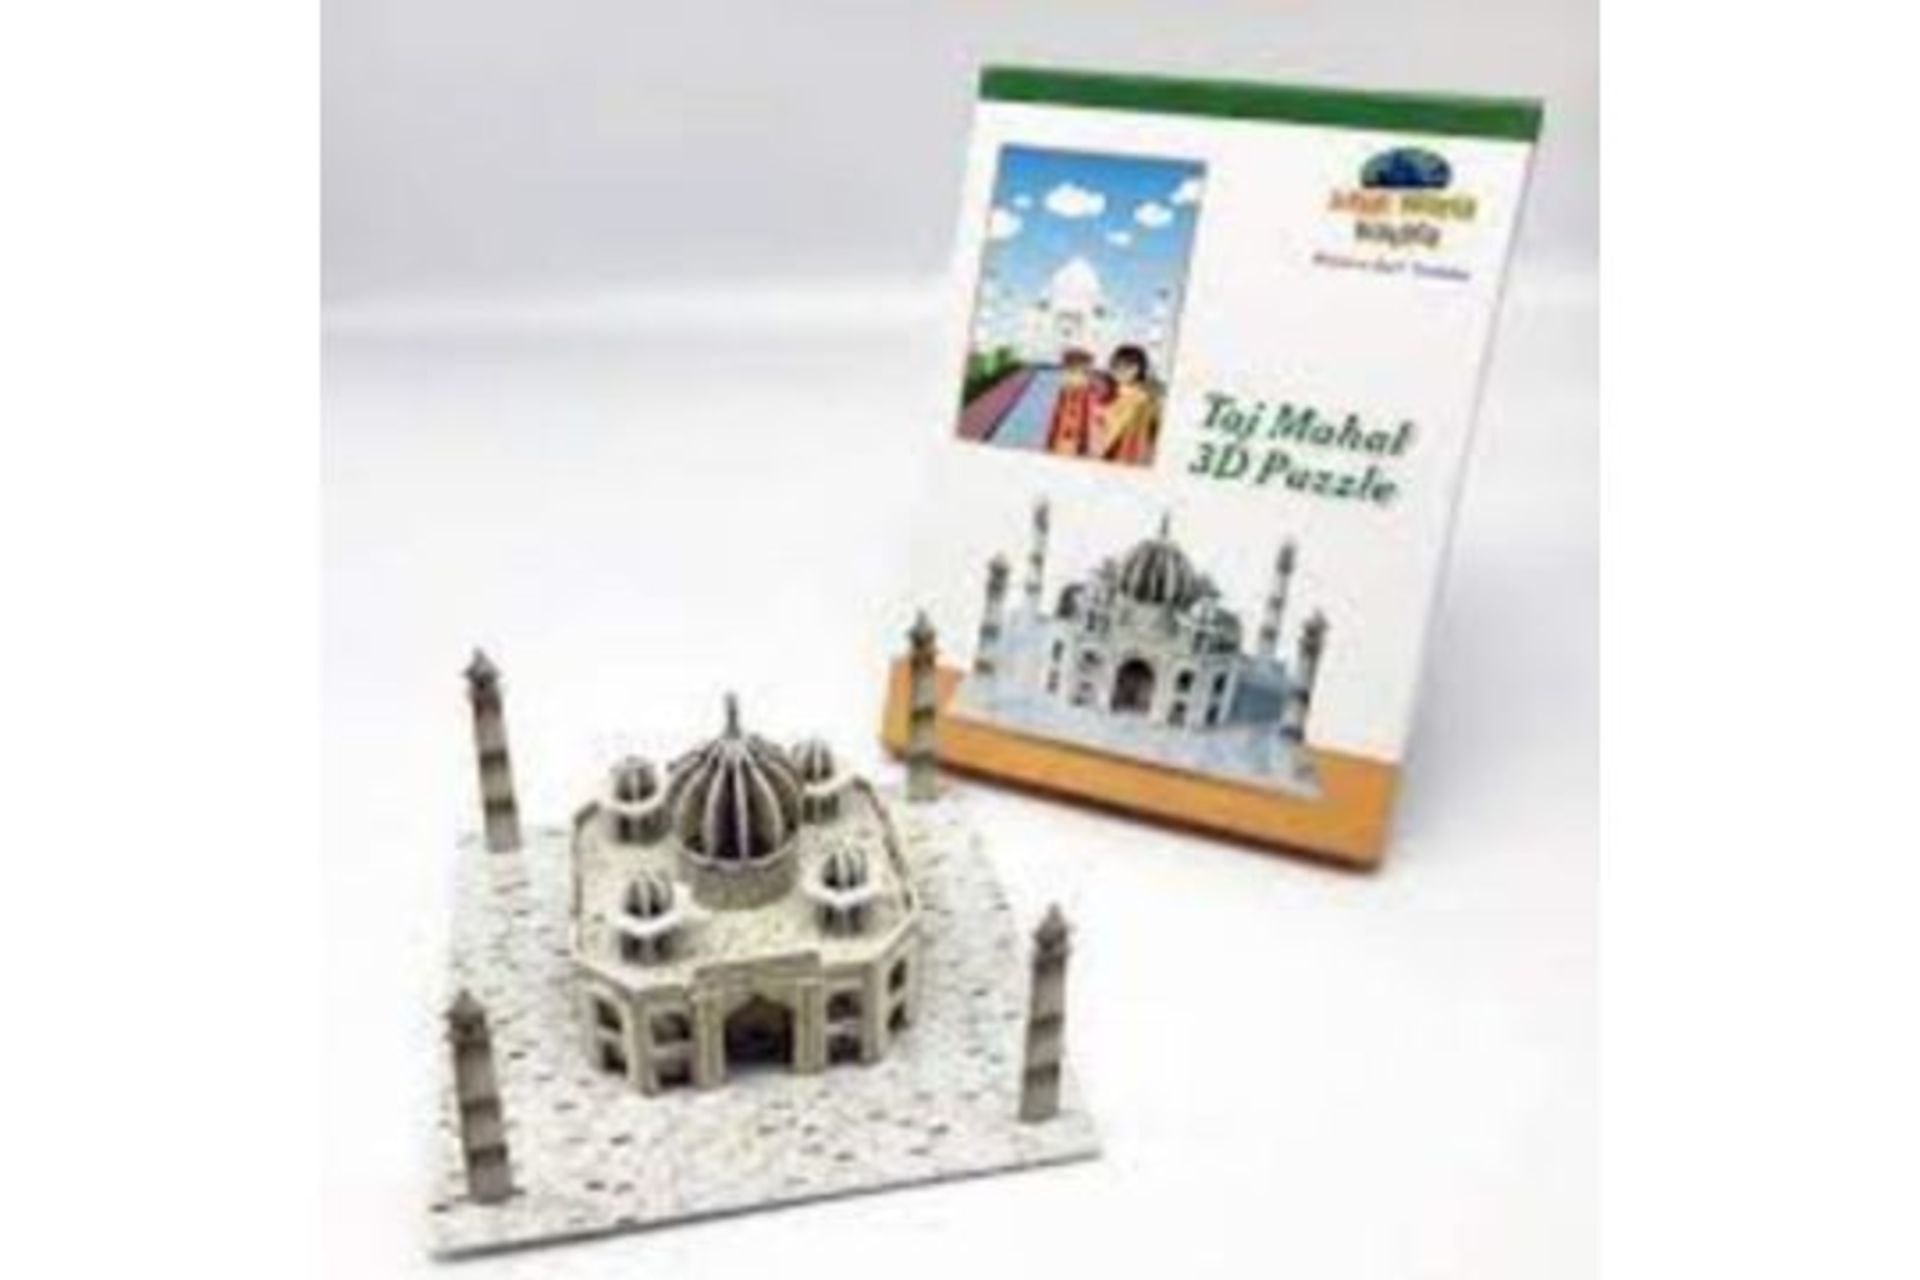 40 X BRAND NEW EDUCTAIONAL TAJ MAHAL 3D PUZZLES - Image 2 of 2